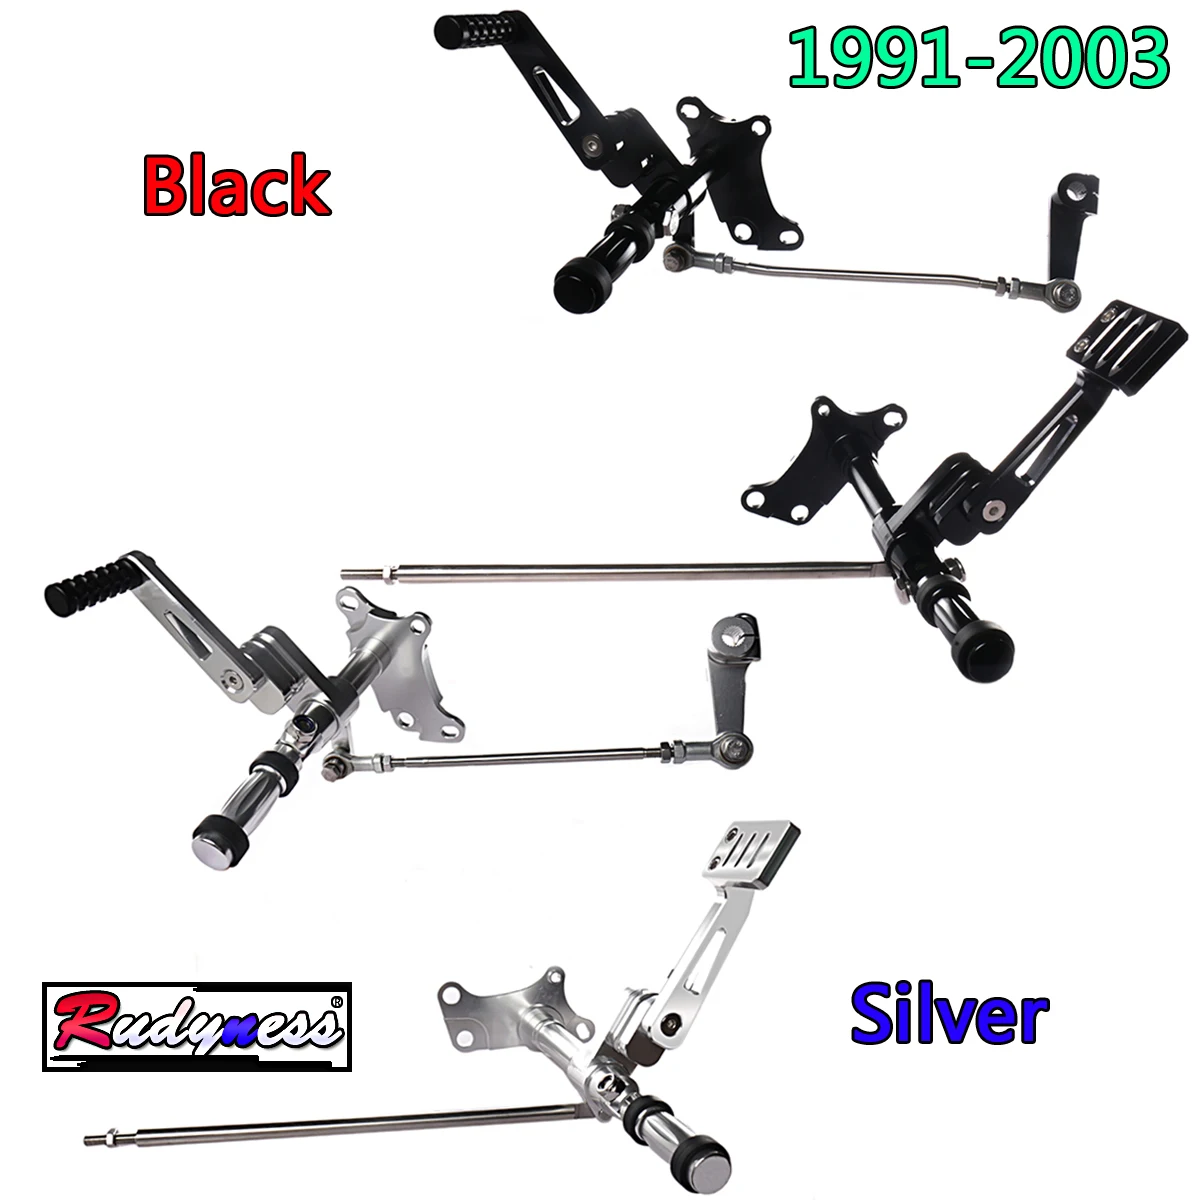 Black Silver Shallow Cut Forward Controls Linkage With Foot Pegs For Harley 1991-2003 Sportster XL 883 1200 Models